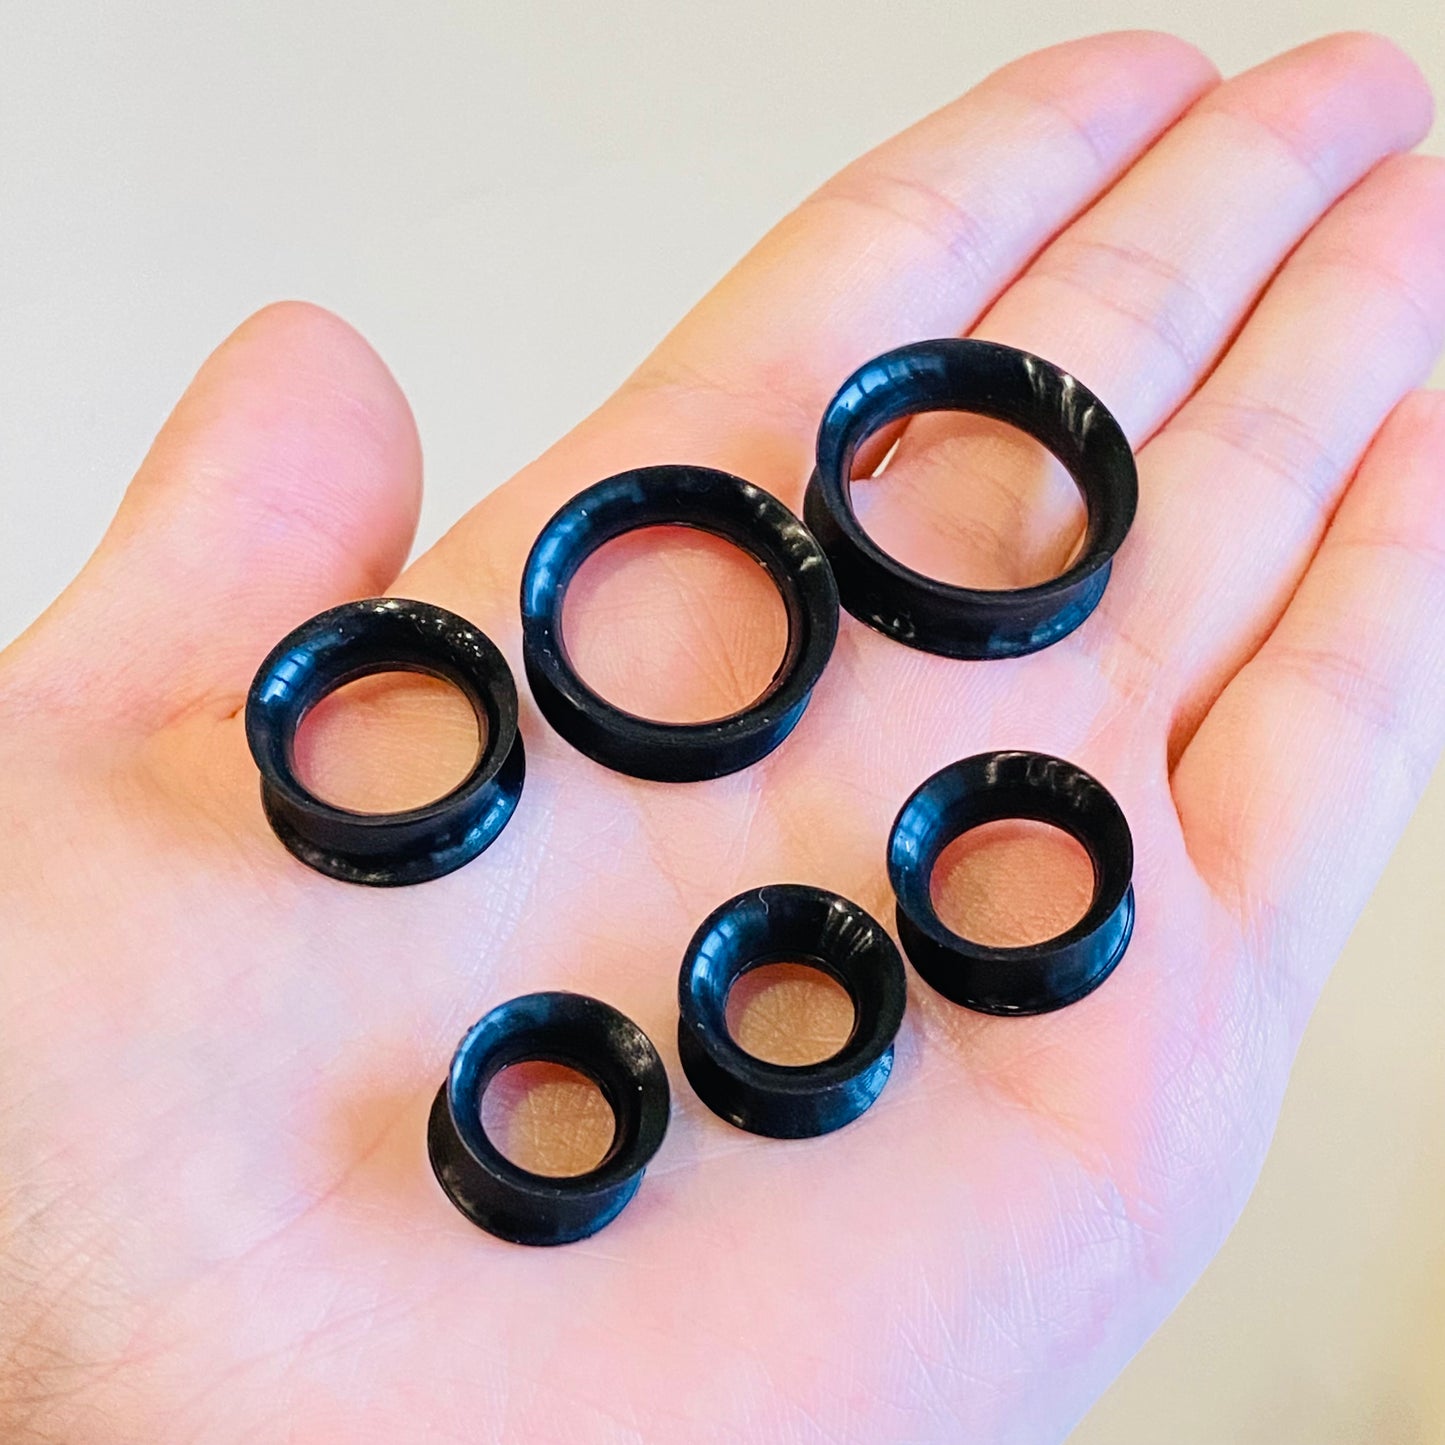 Giant Black Ear Skin Silicone Tunnels 1/2" to 1"